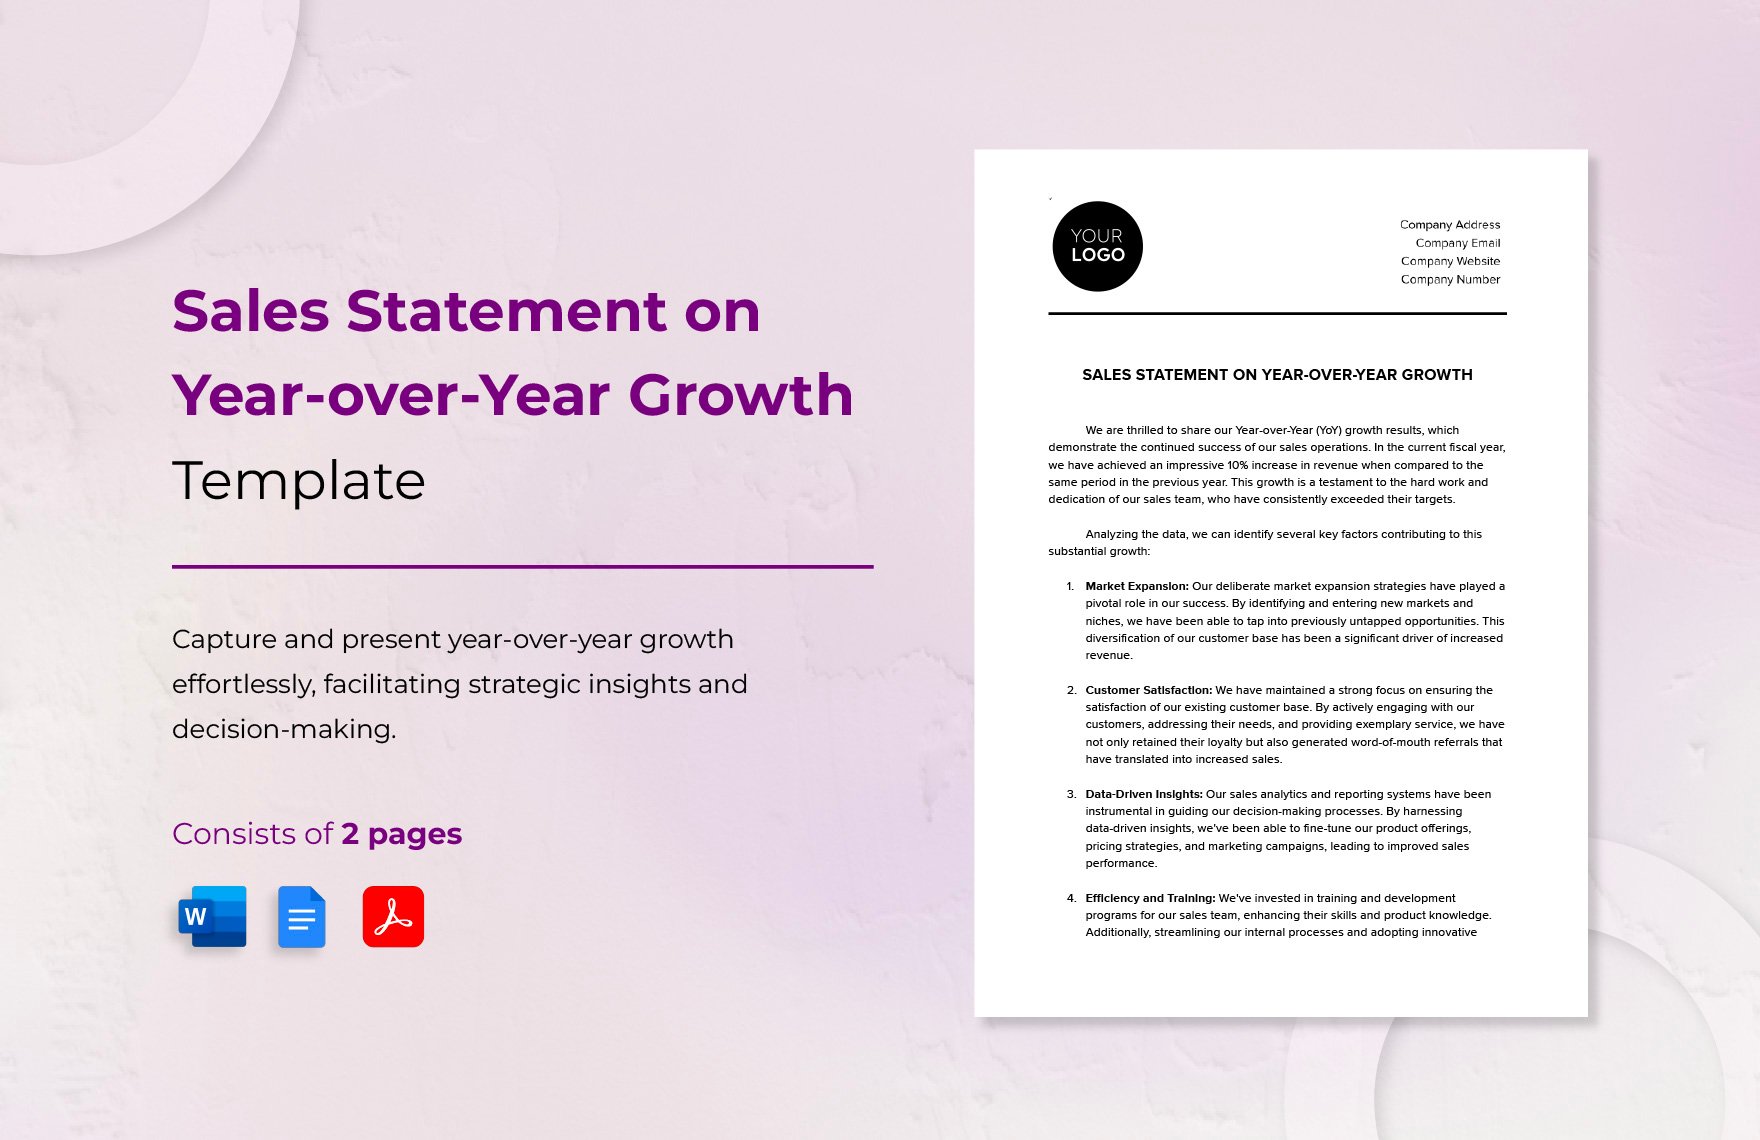 Sales Statement on Year-over-Year Growth Template in Word, Google Docs, PDF